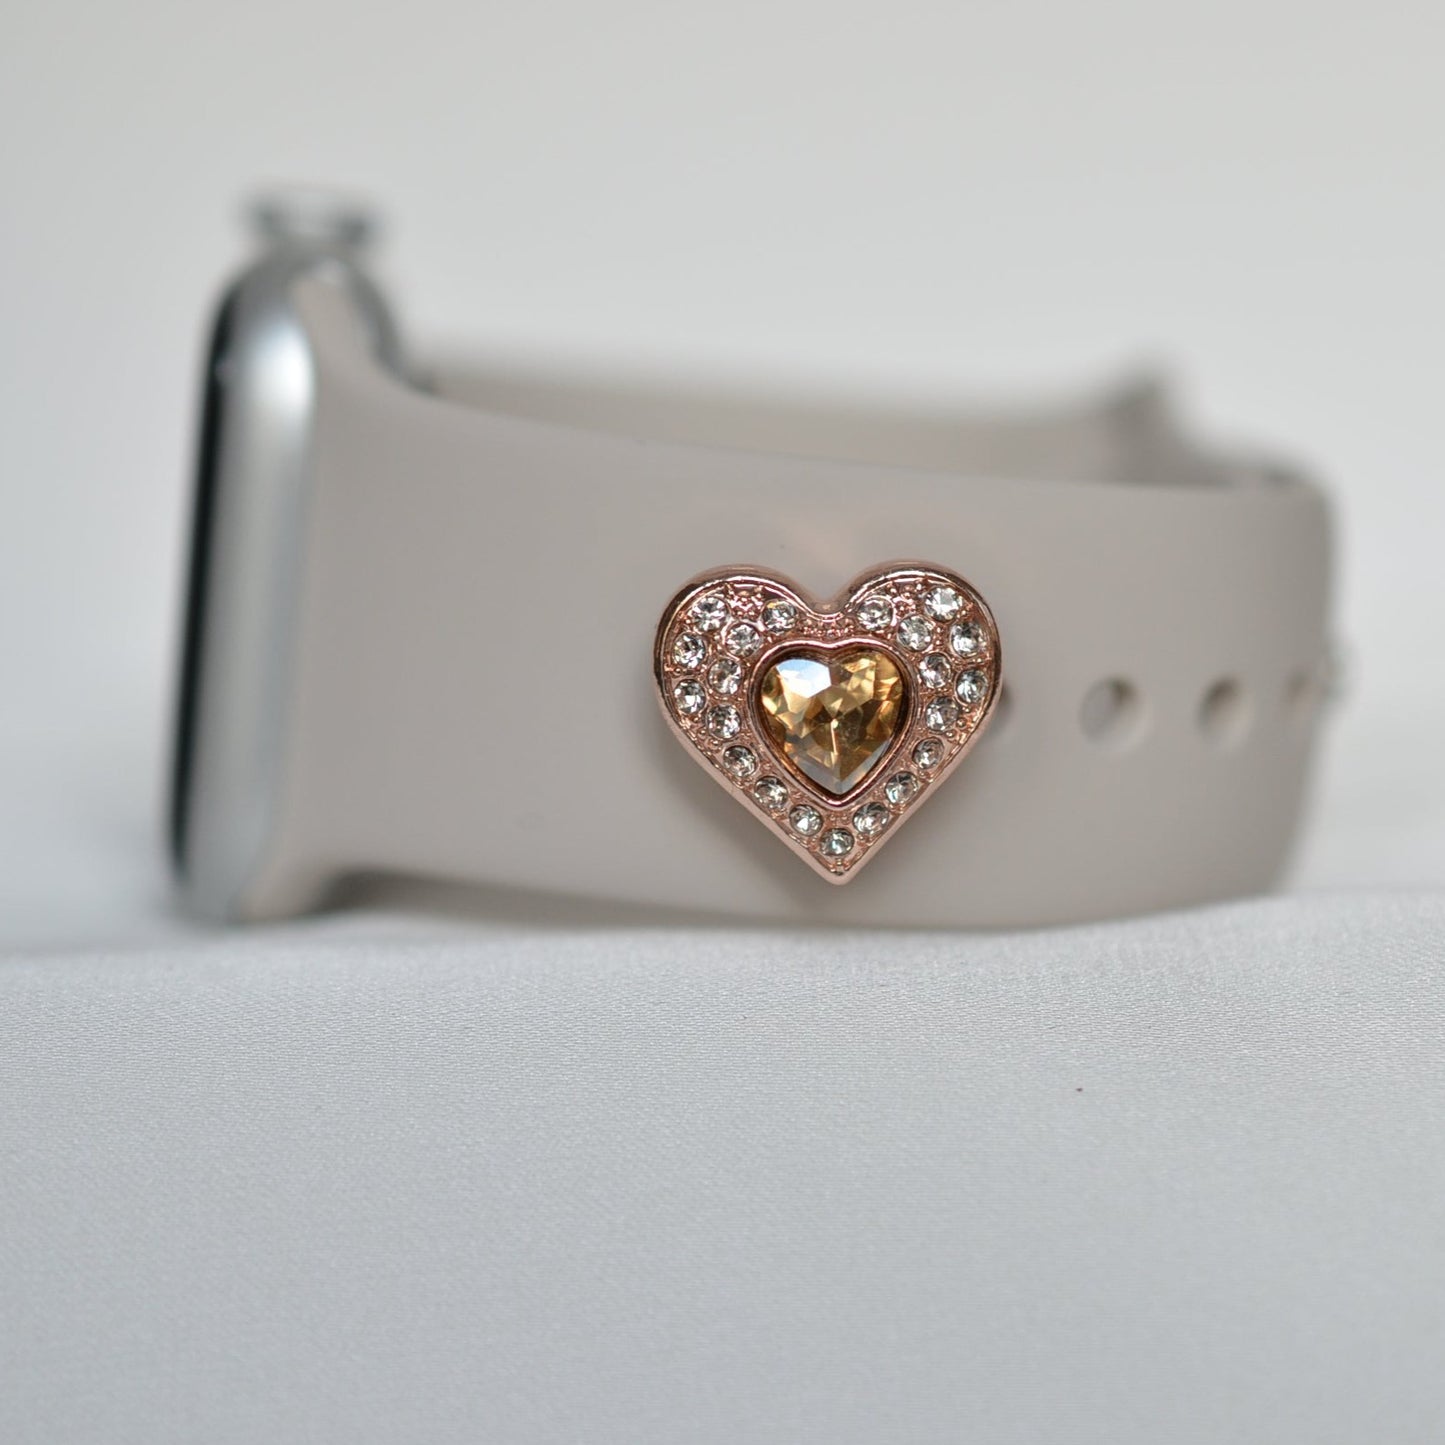 Citron Heart with Gold Coating Charm for Belts, Bags and Watch Bands